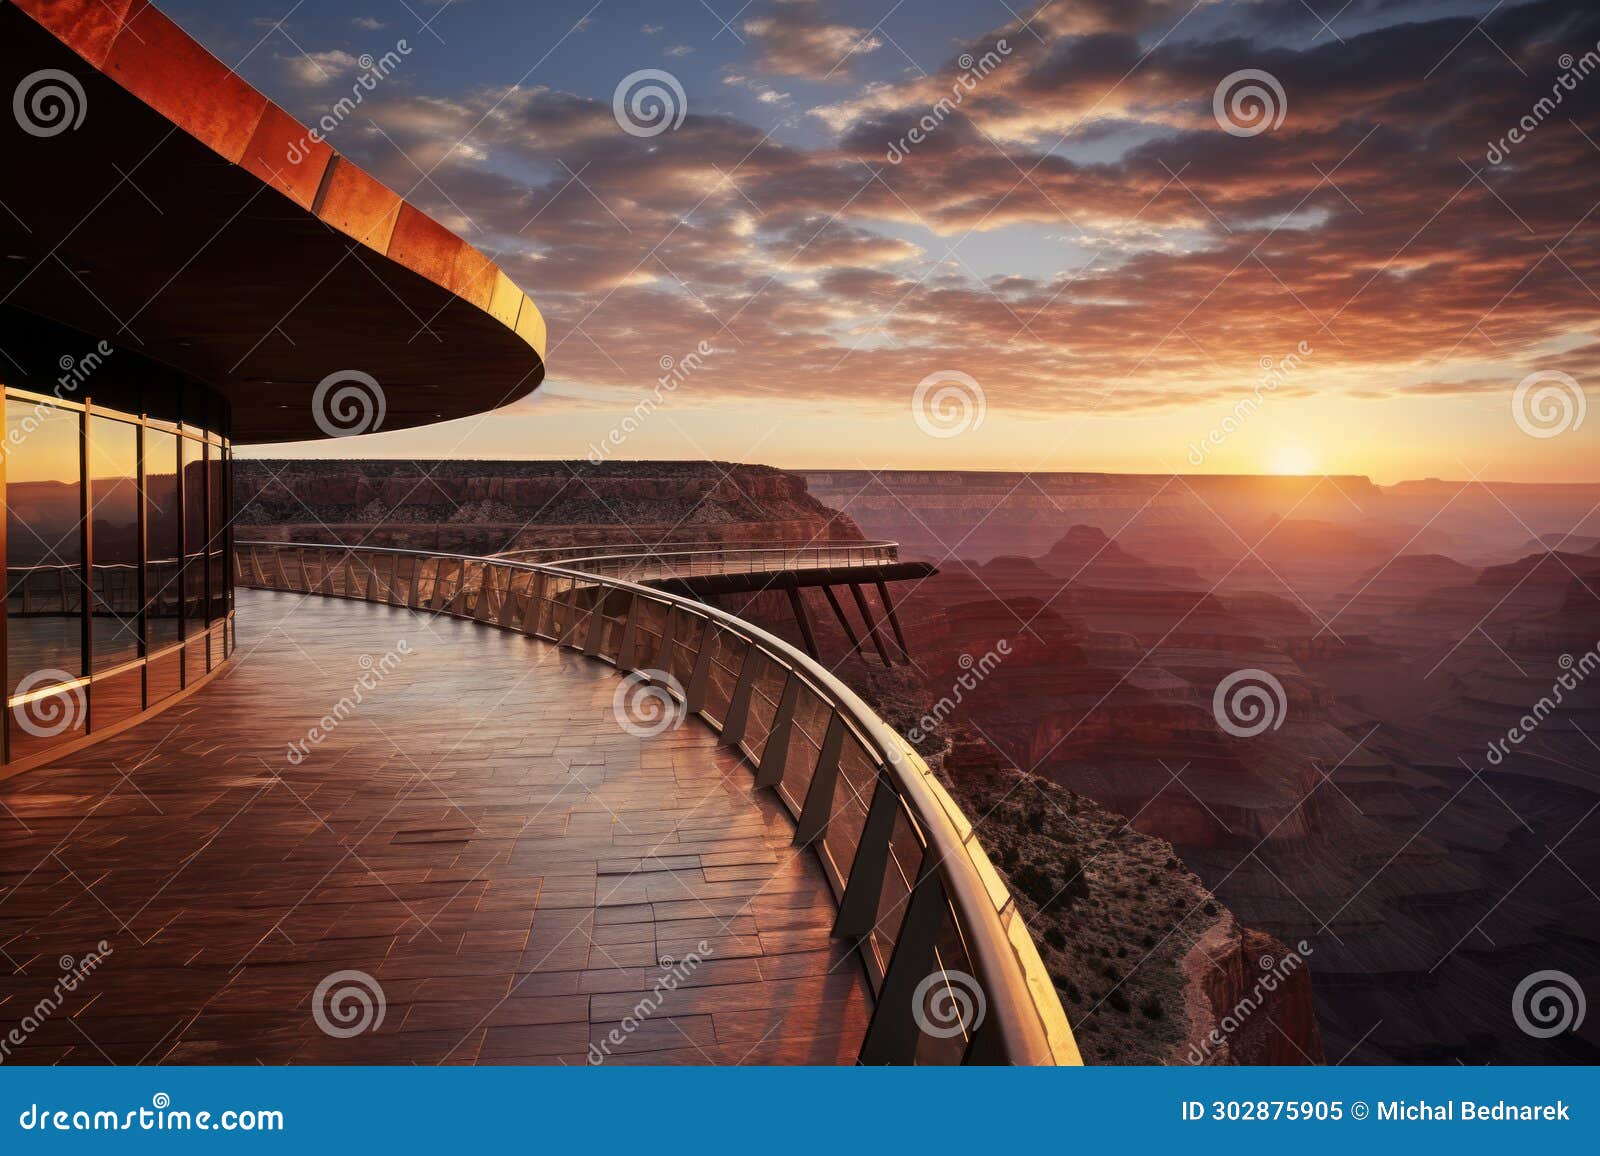 modern architecture on cliffside at canyon scenery